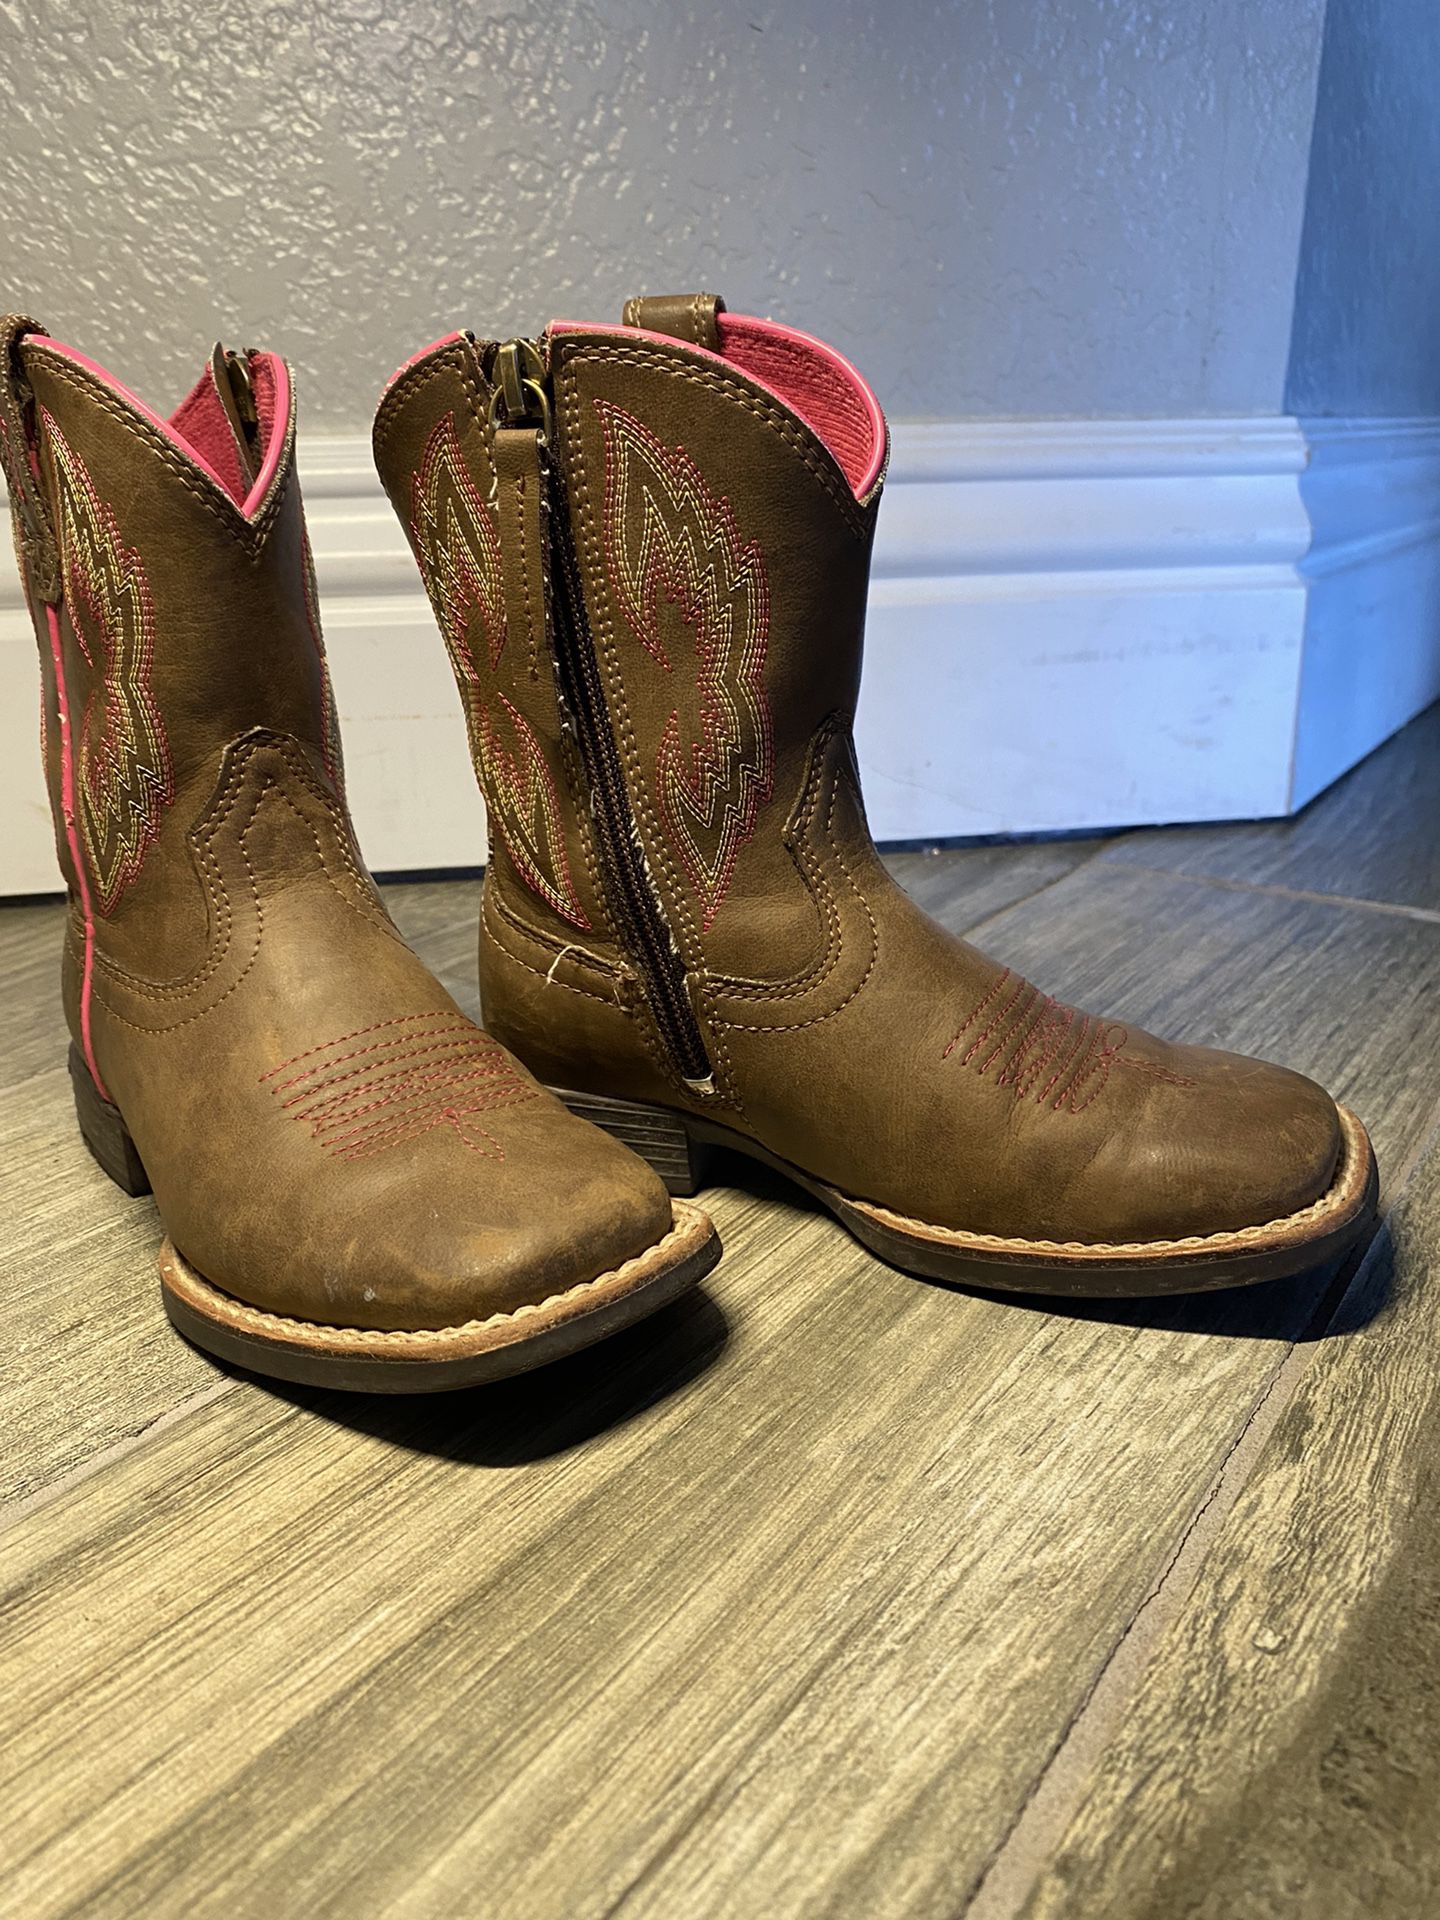 Ariat Girls Cowboy Boots Size 9 Brown And Pink 